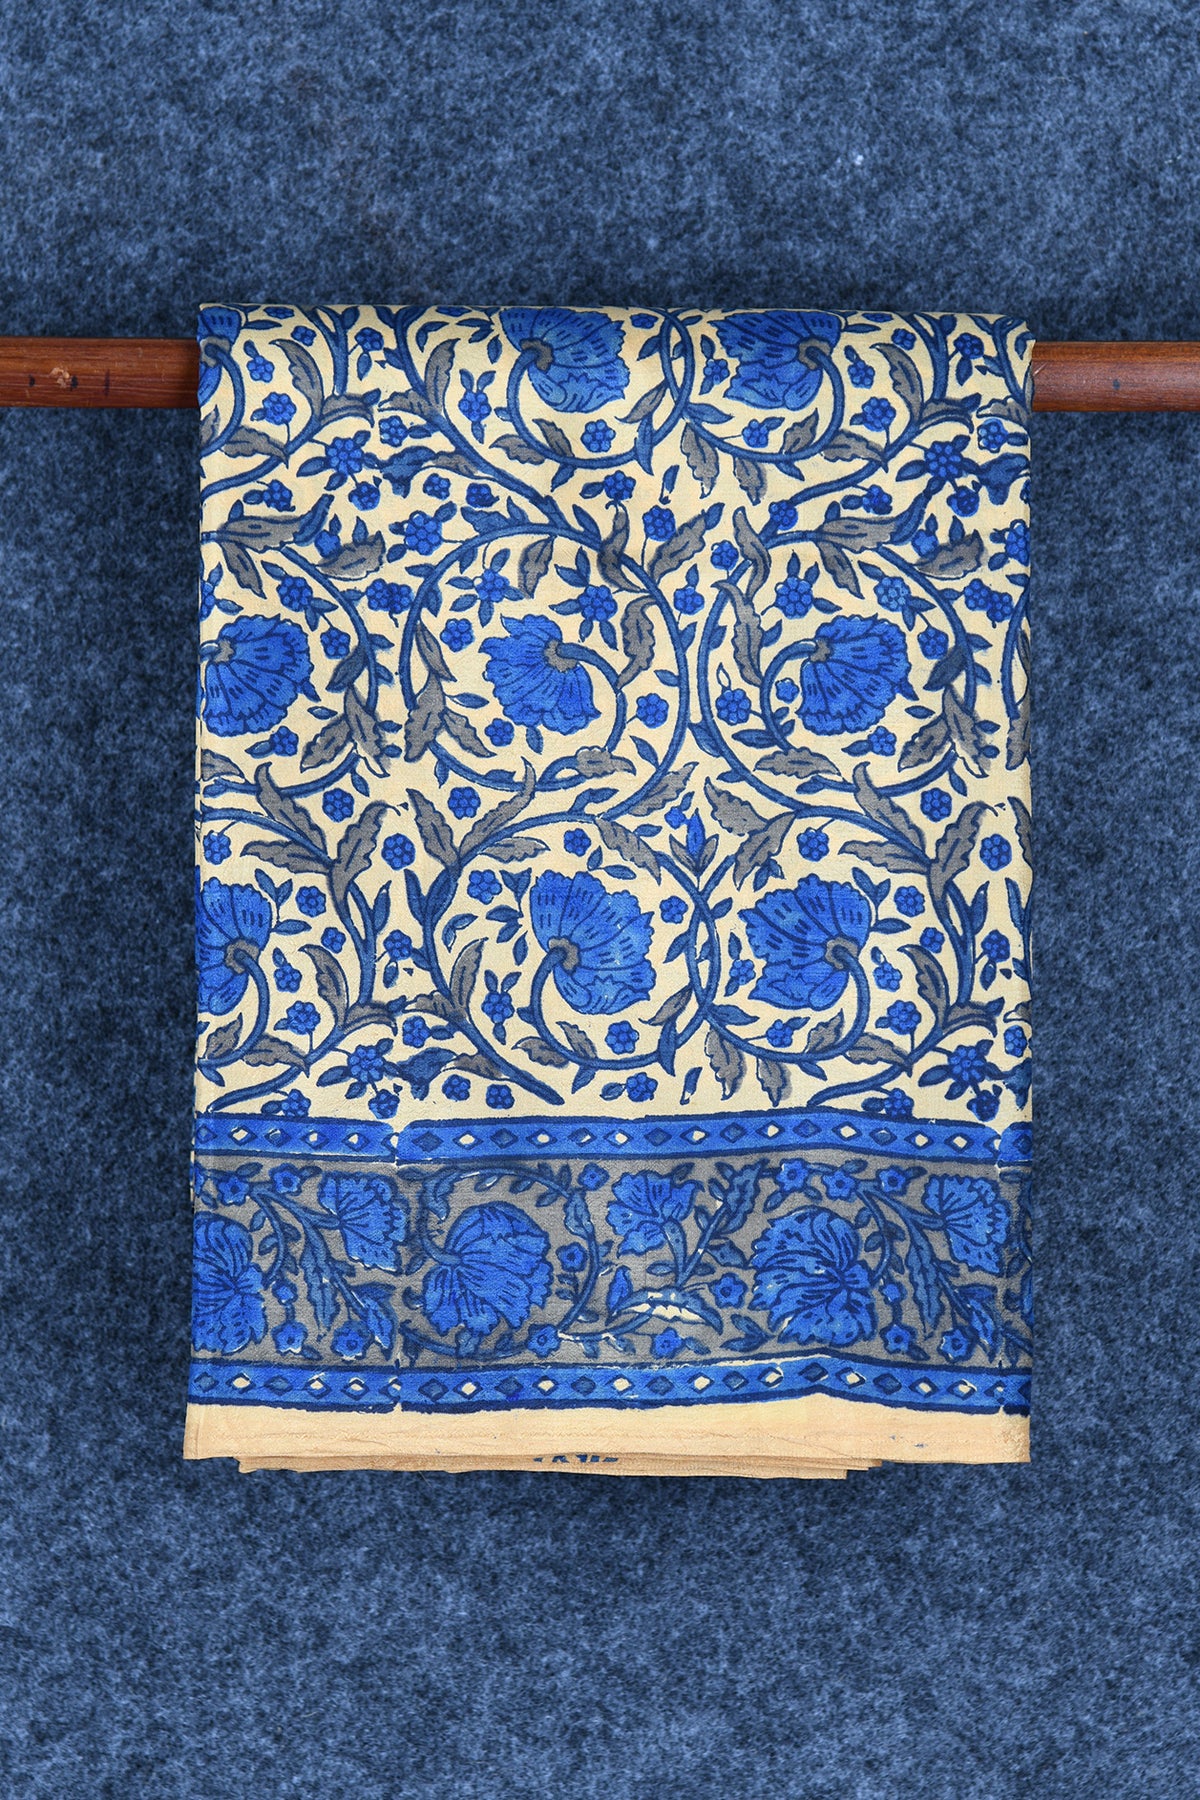 Floral Creepers Design Cream And Navy Blue Printed Silk Saree